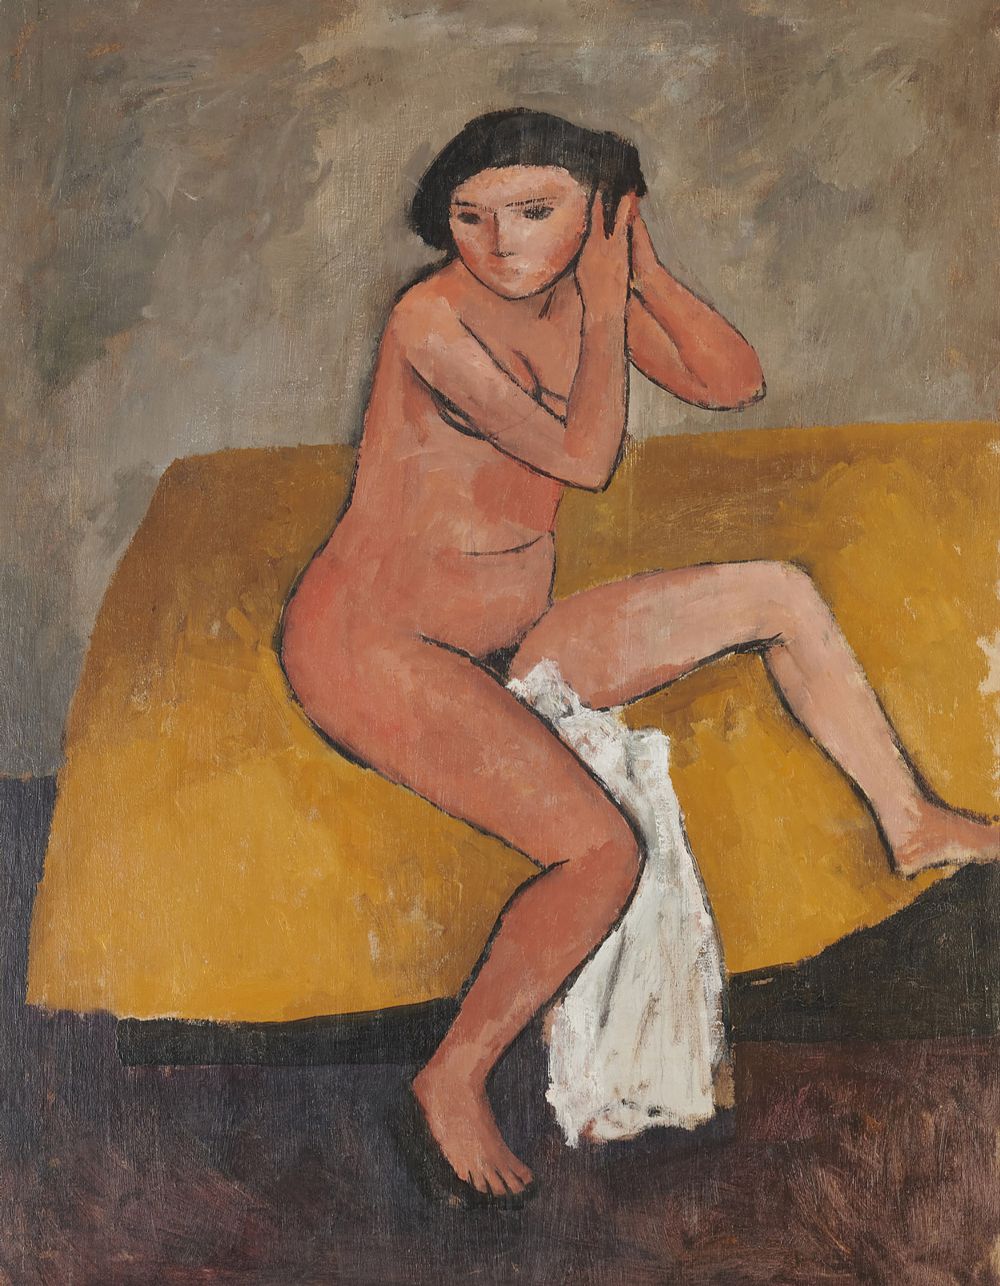 Lot 37 - NUDE ON A YELLOW COUCH by William Scott